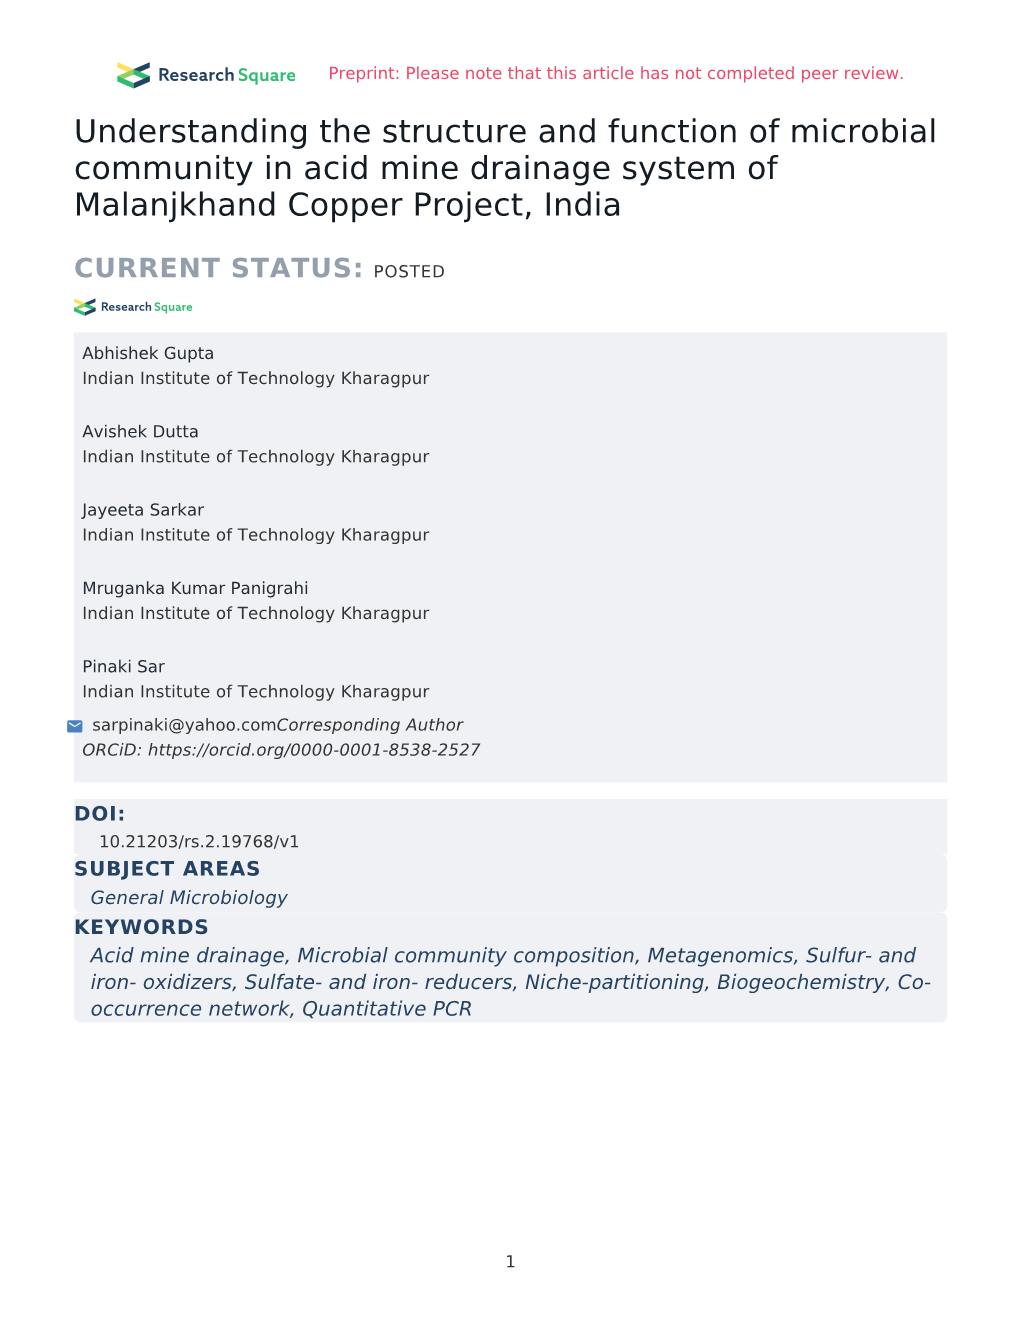 Understanding the Structure and Function of Microbial Community in Acid Mine Drainage System of Malanjkhand Copper Project, India